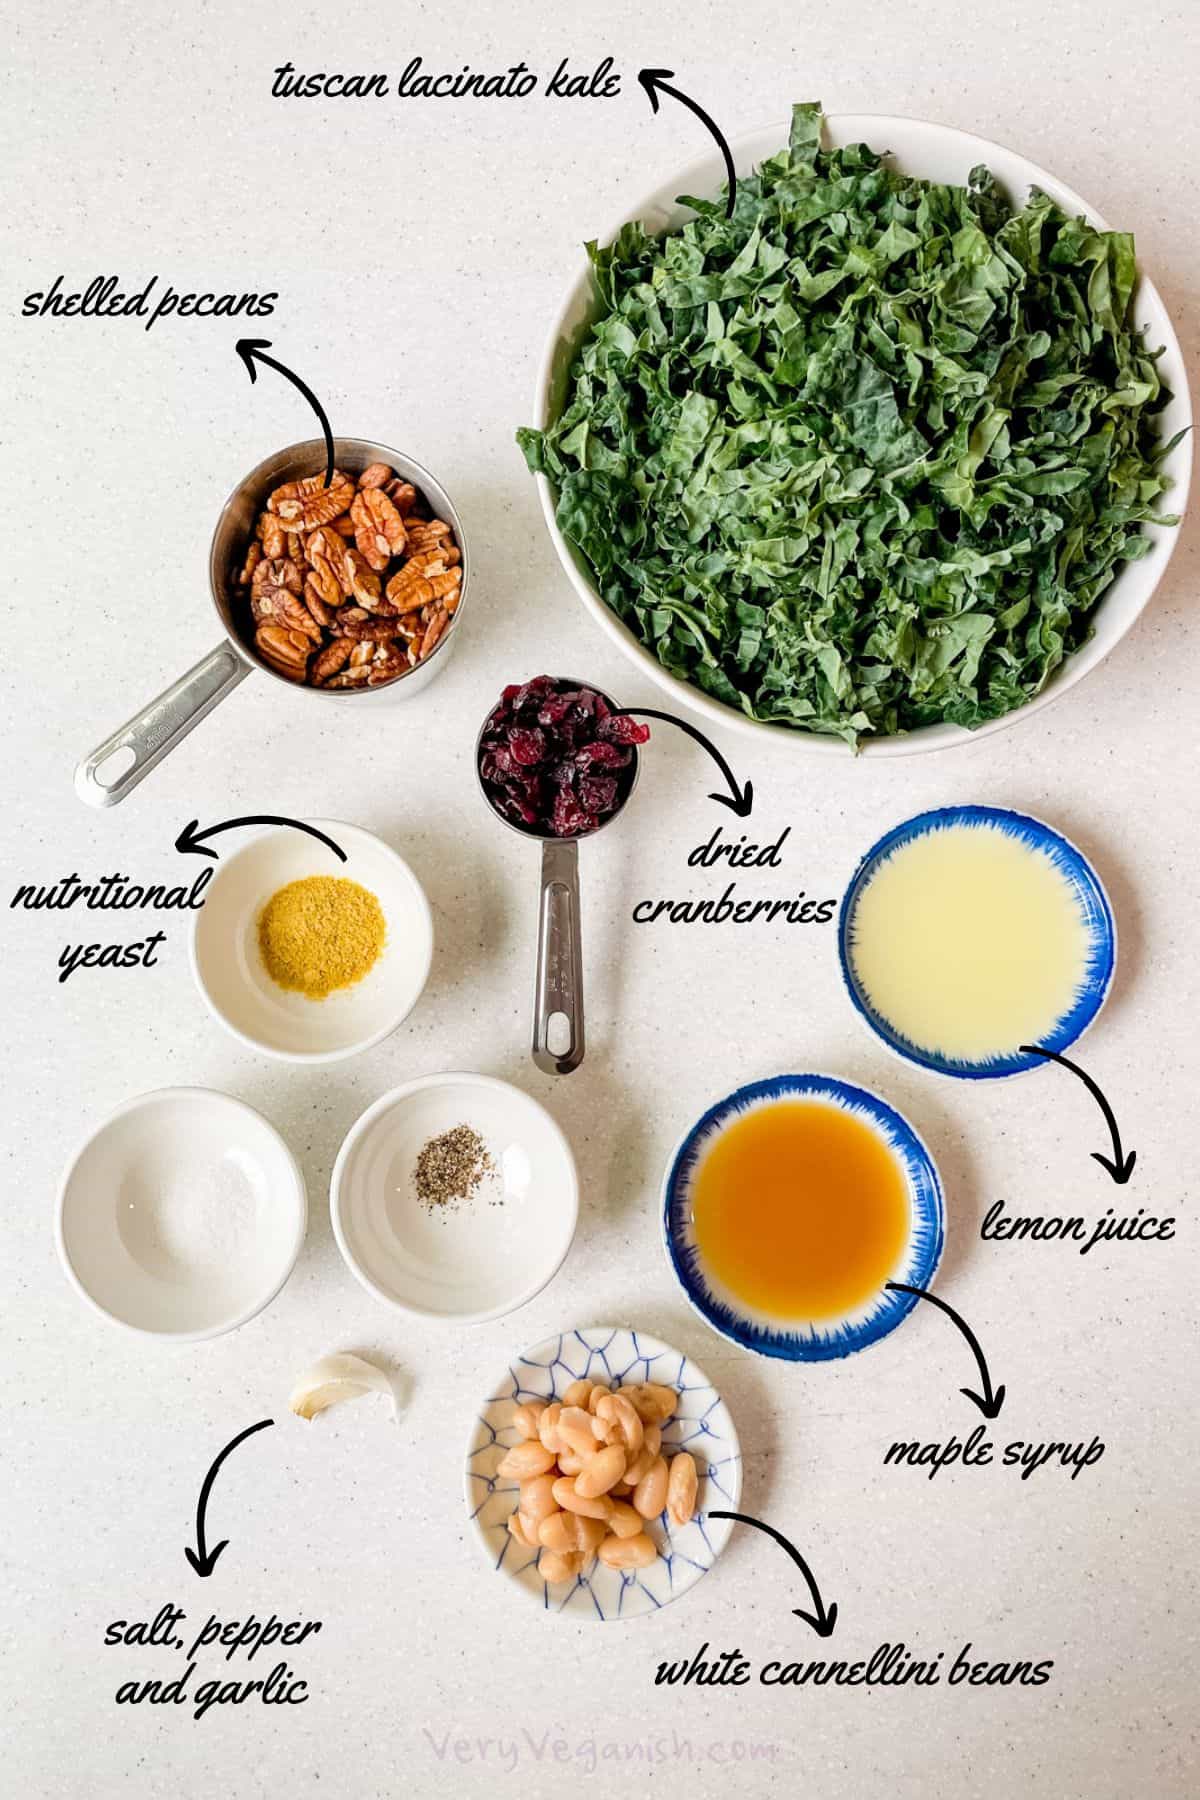 Ingredients for Kale Chopped Salad with Creamy Lemon Garlic Dressing (vegan, oil-free) - tuscan lacinato kale, shelled pecans, nutritional yeast, dried cranberries, lemon juice, maple syrup, white cannellini beans, salt, pepper, garlic